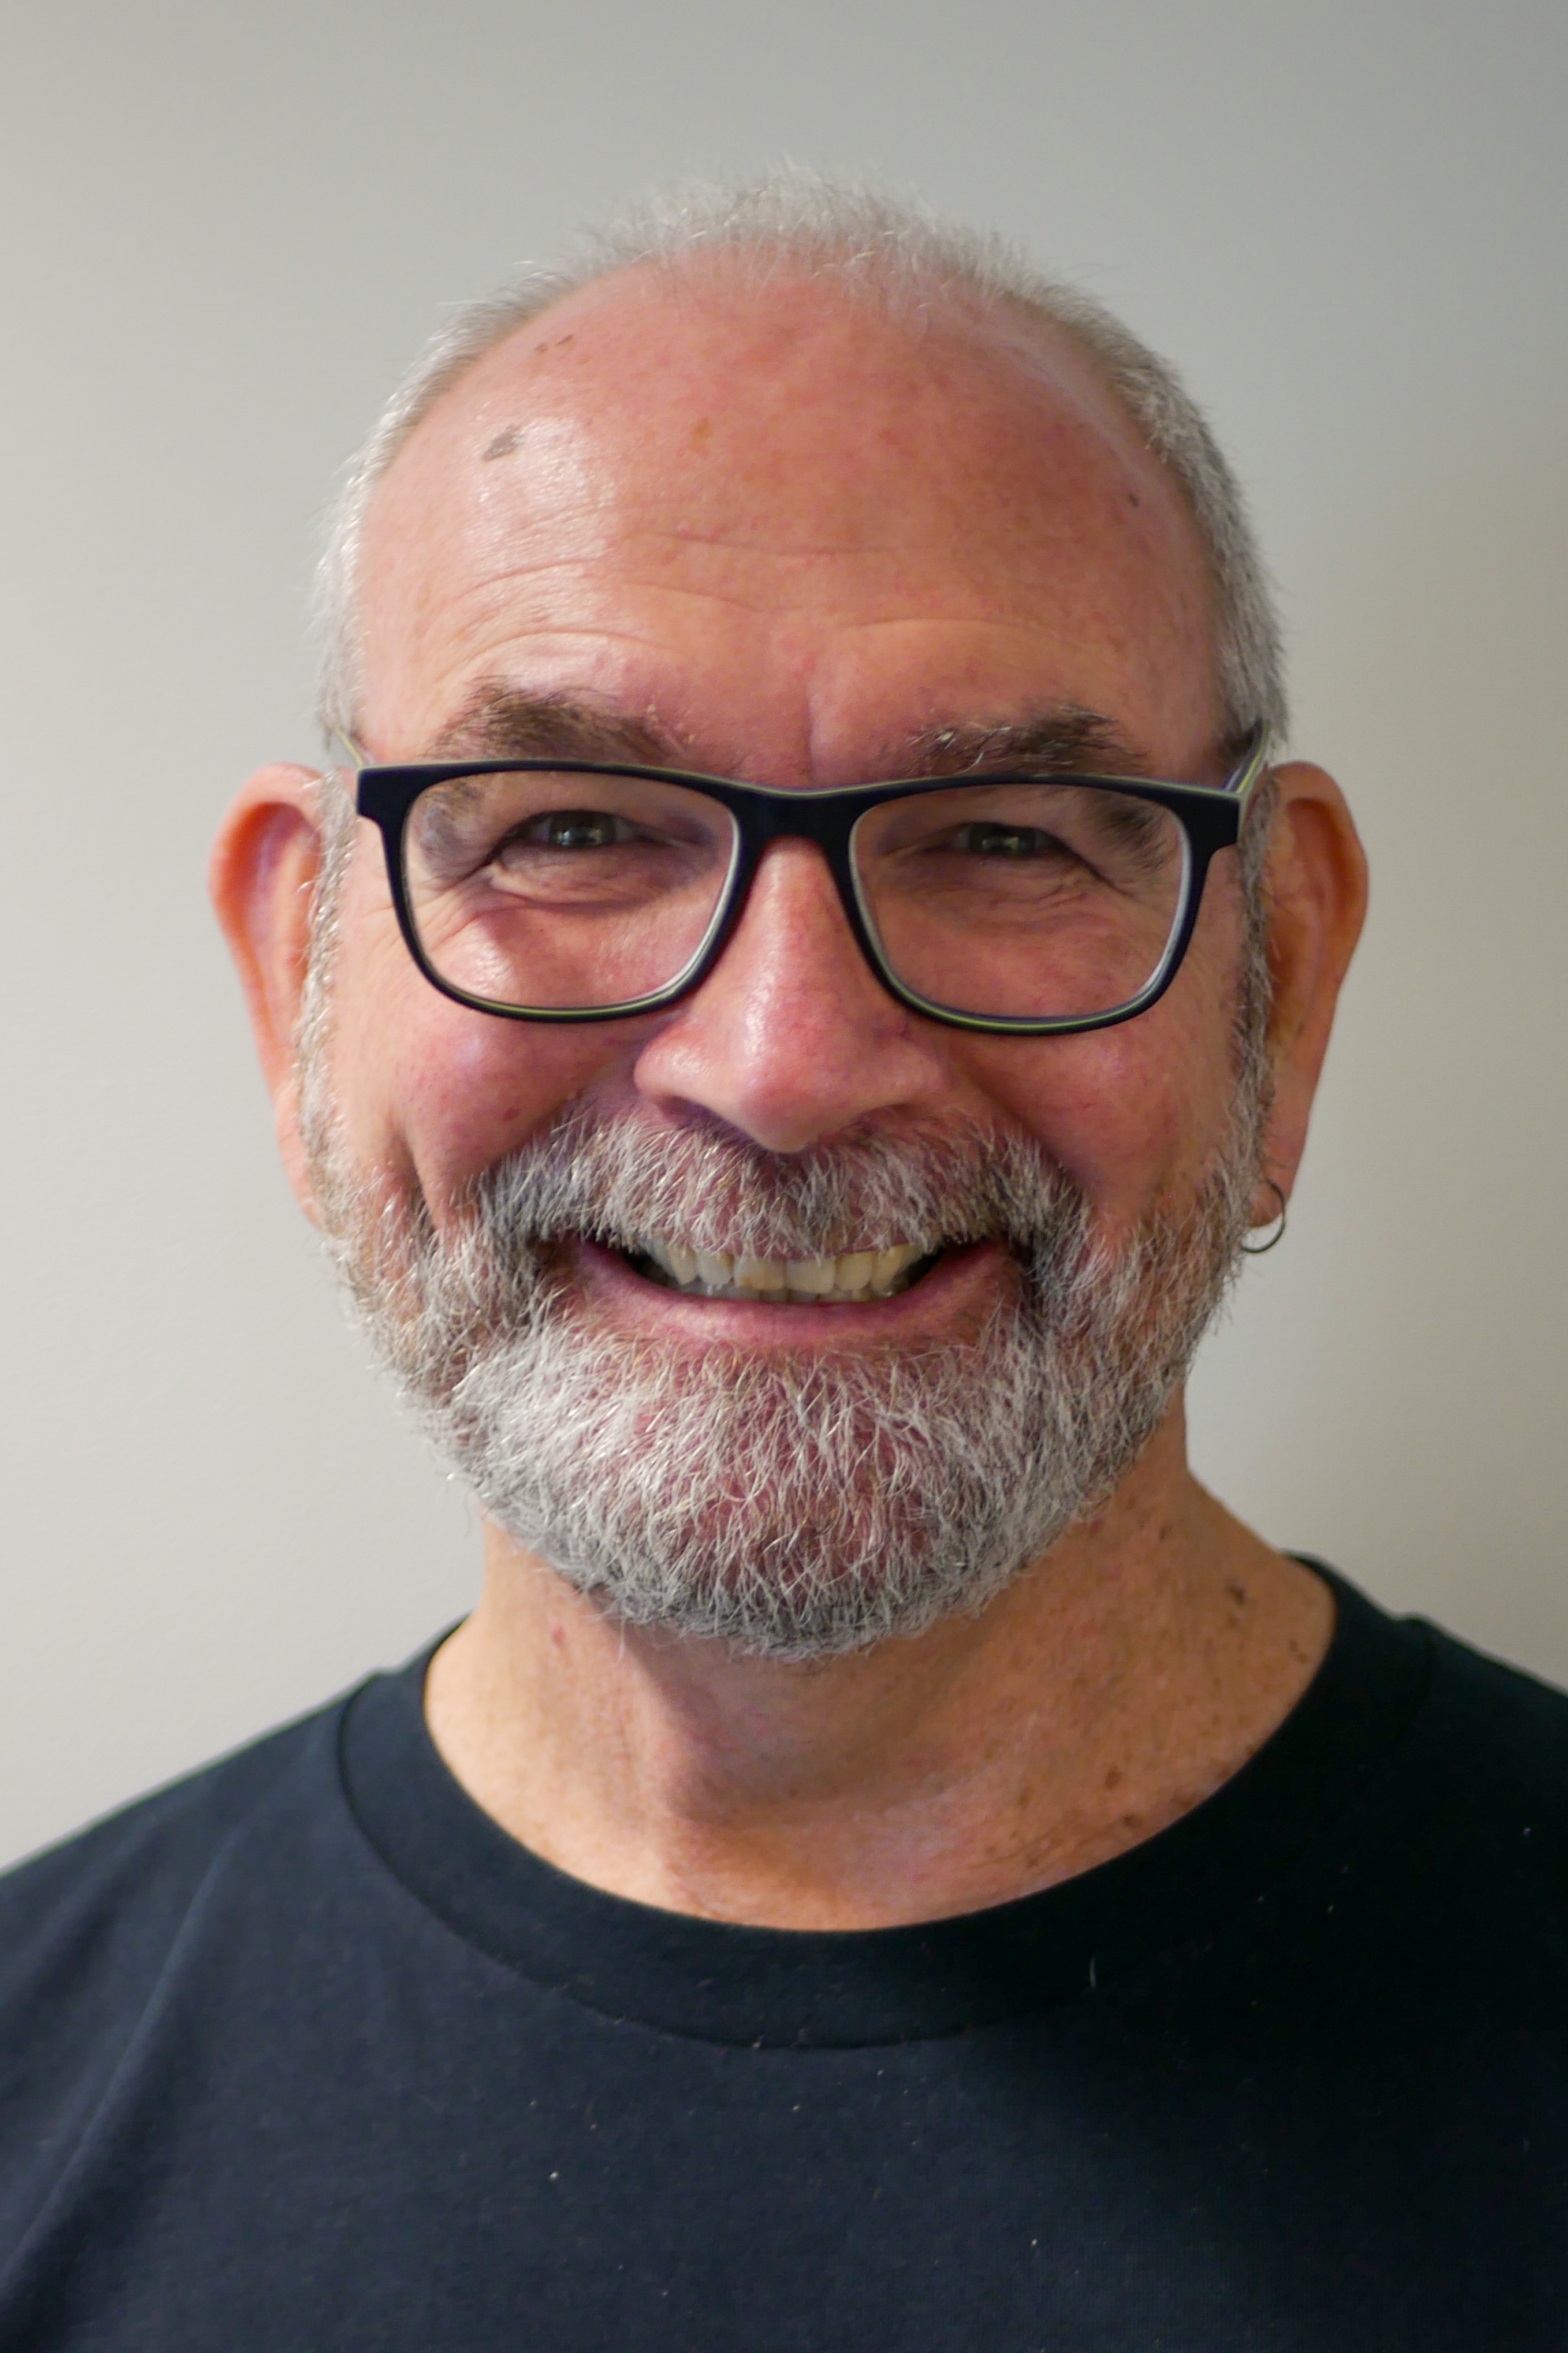 Jim wearing glasses and a black shirt, he has a short beard and is smiling.